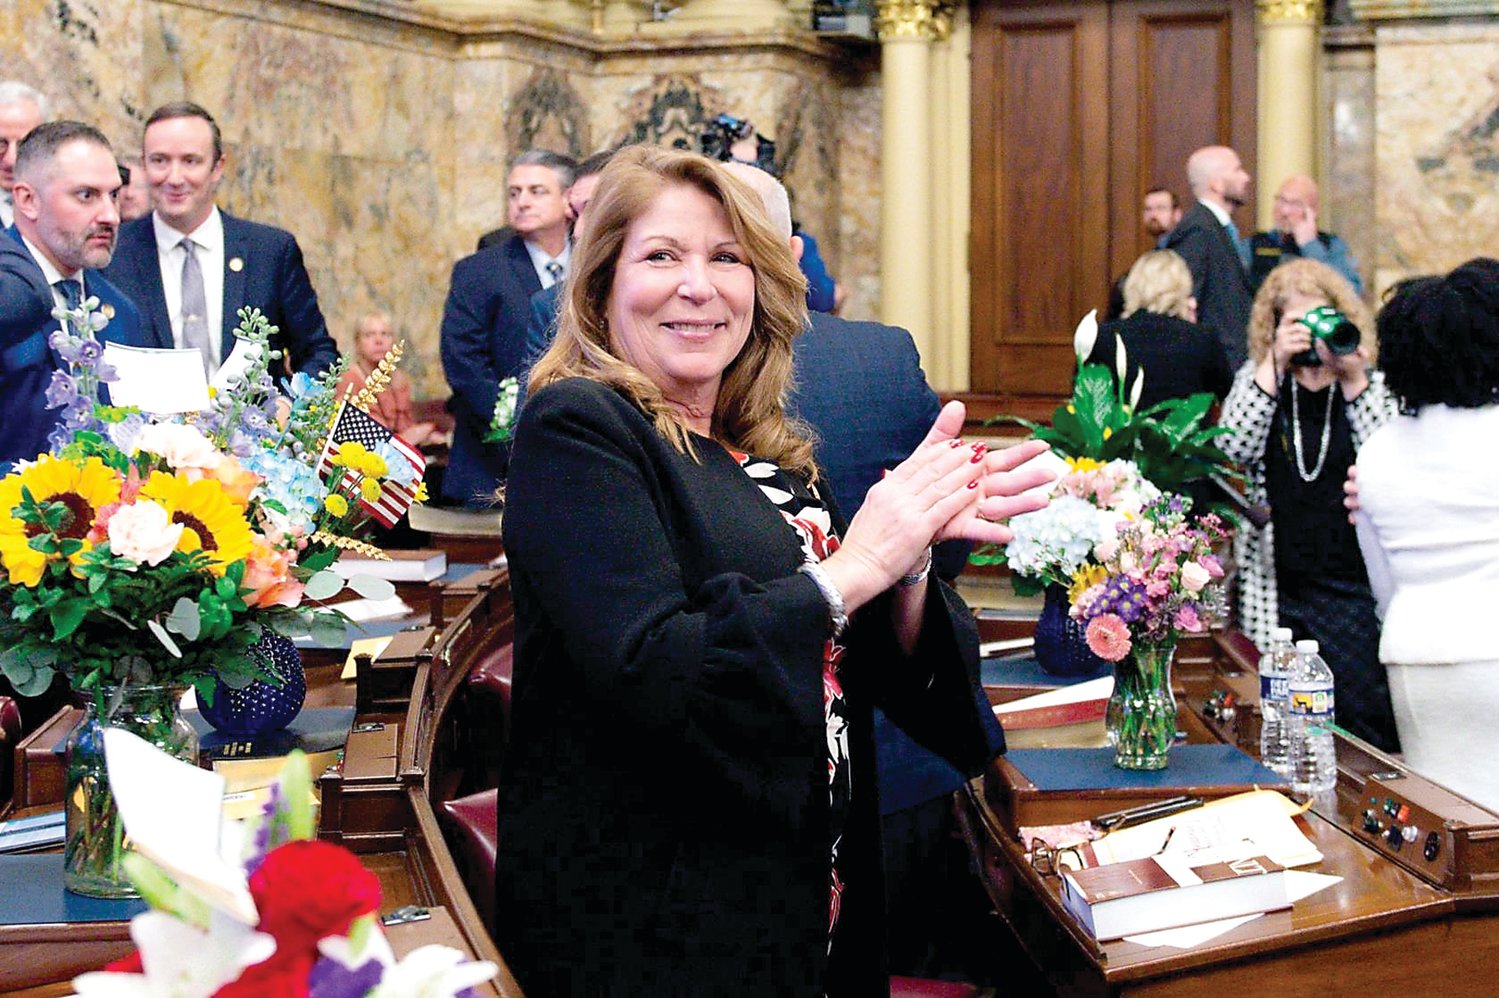 Rep. Tina Davis, a Democrat, represents the 141st PA House District, which consists of Bristol Township and Bristol Borough. Reach her district office at 267-580-2660.